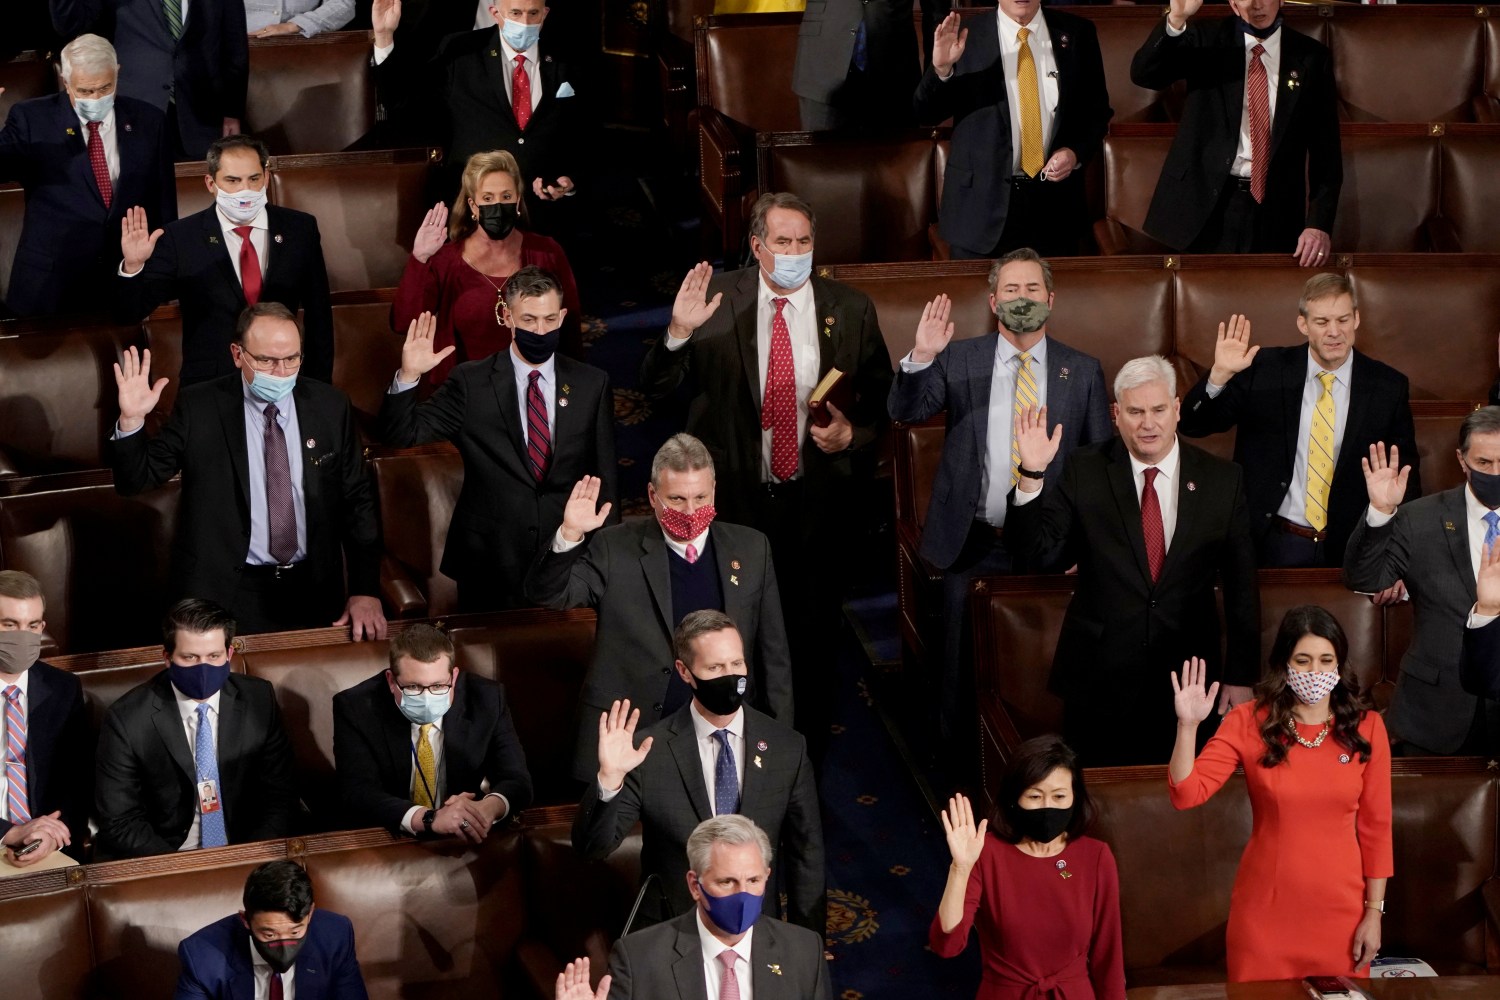 Republican members of the U.S. House of Representatives take their oath of office on the floor of the House Chamber during the first session of the 117th Congress on Capitol Hill in Washington, U.S., January 3, 2021.   REUTERS/Joshua Roberts     TPX IMAGES OF THE DAY